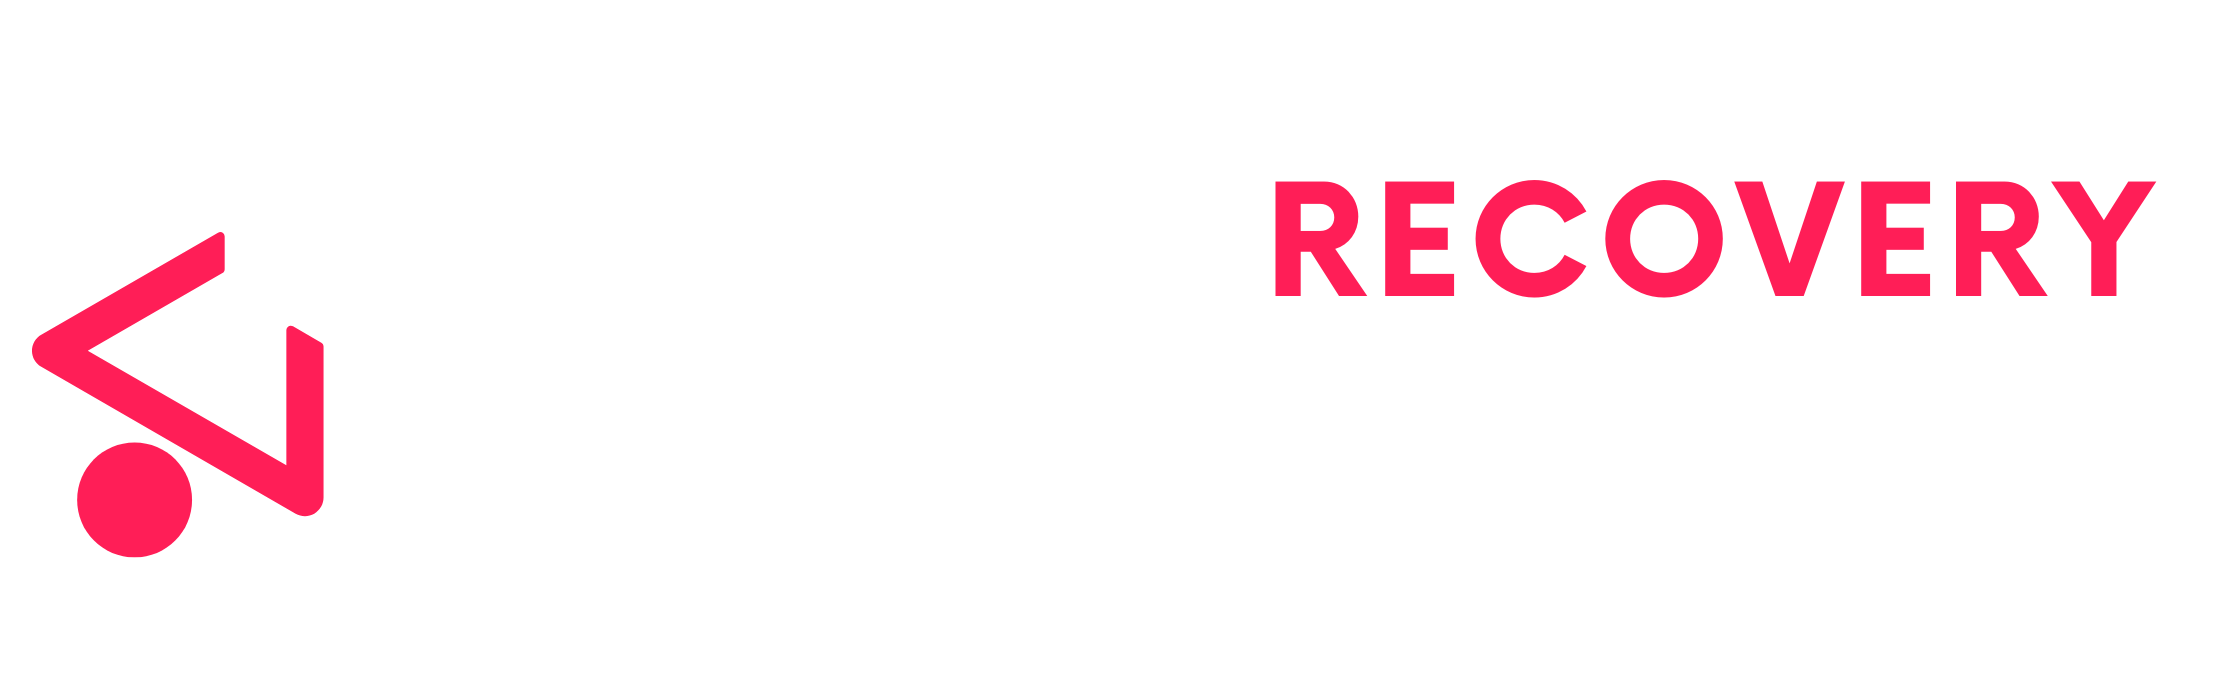 Fitness Recovery Lab